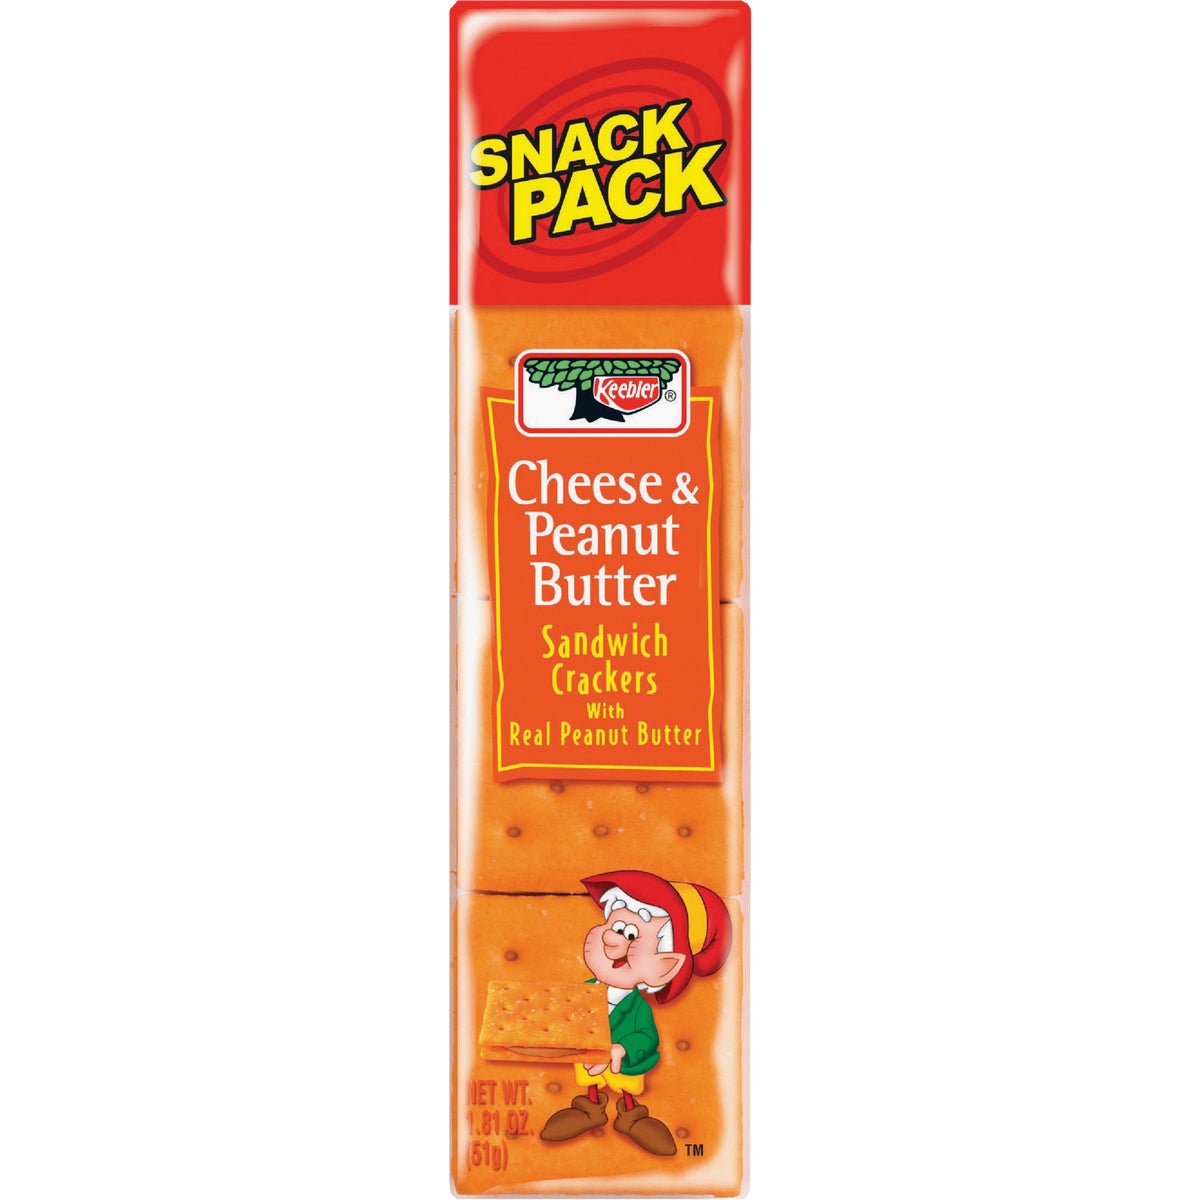 Item 970605, Keebler Cheese &amp; Peanut Butter crackers snack pack.